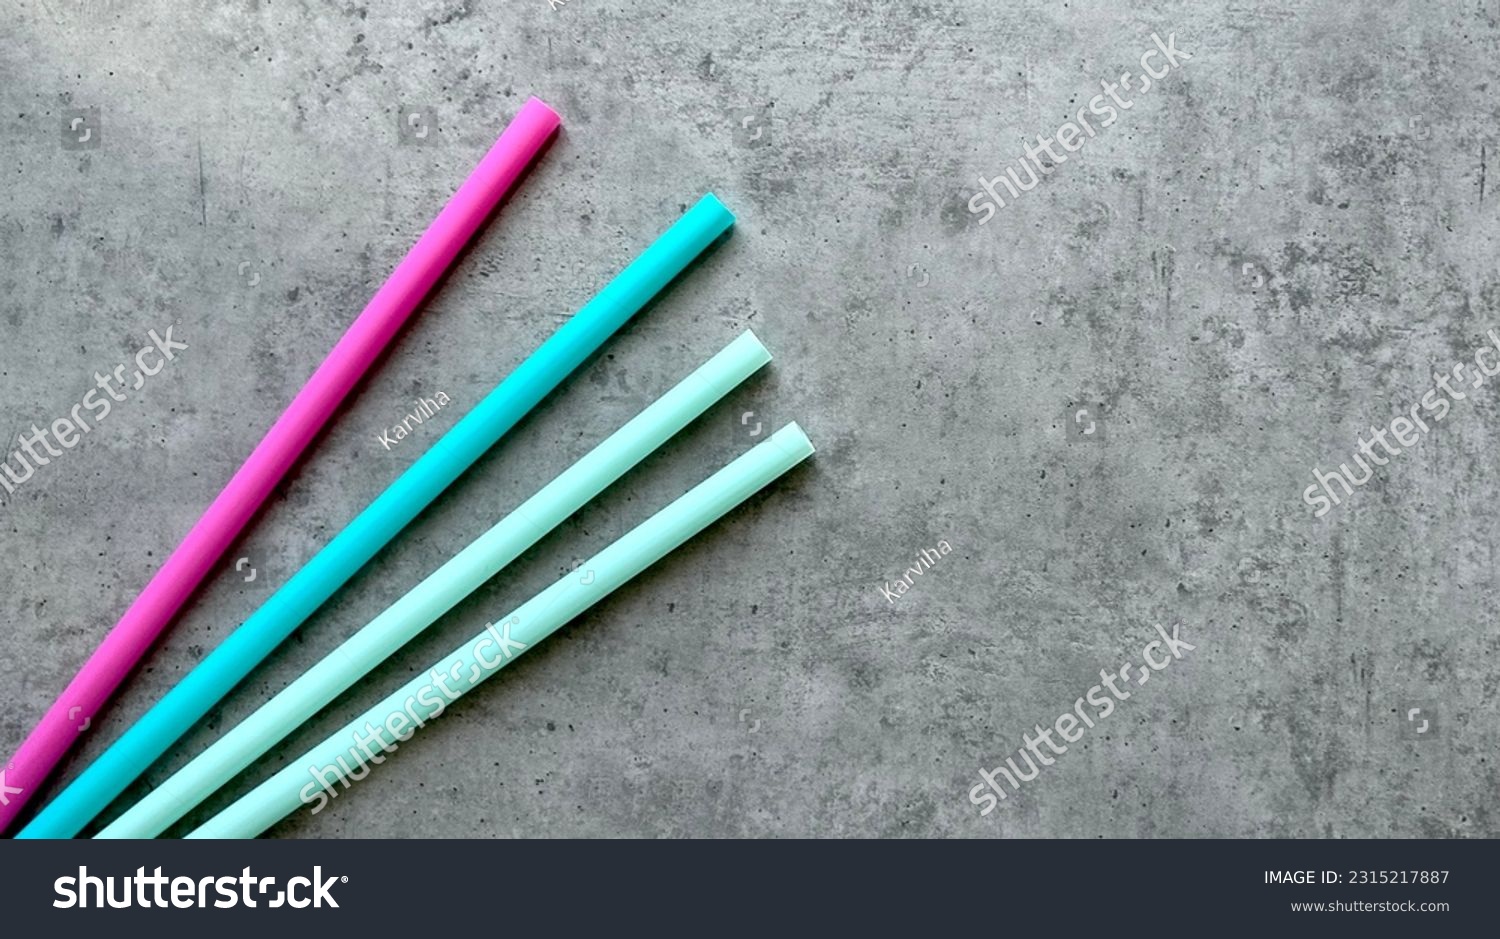 colored plastic straws for drinking on a gray background #2315217887